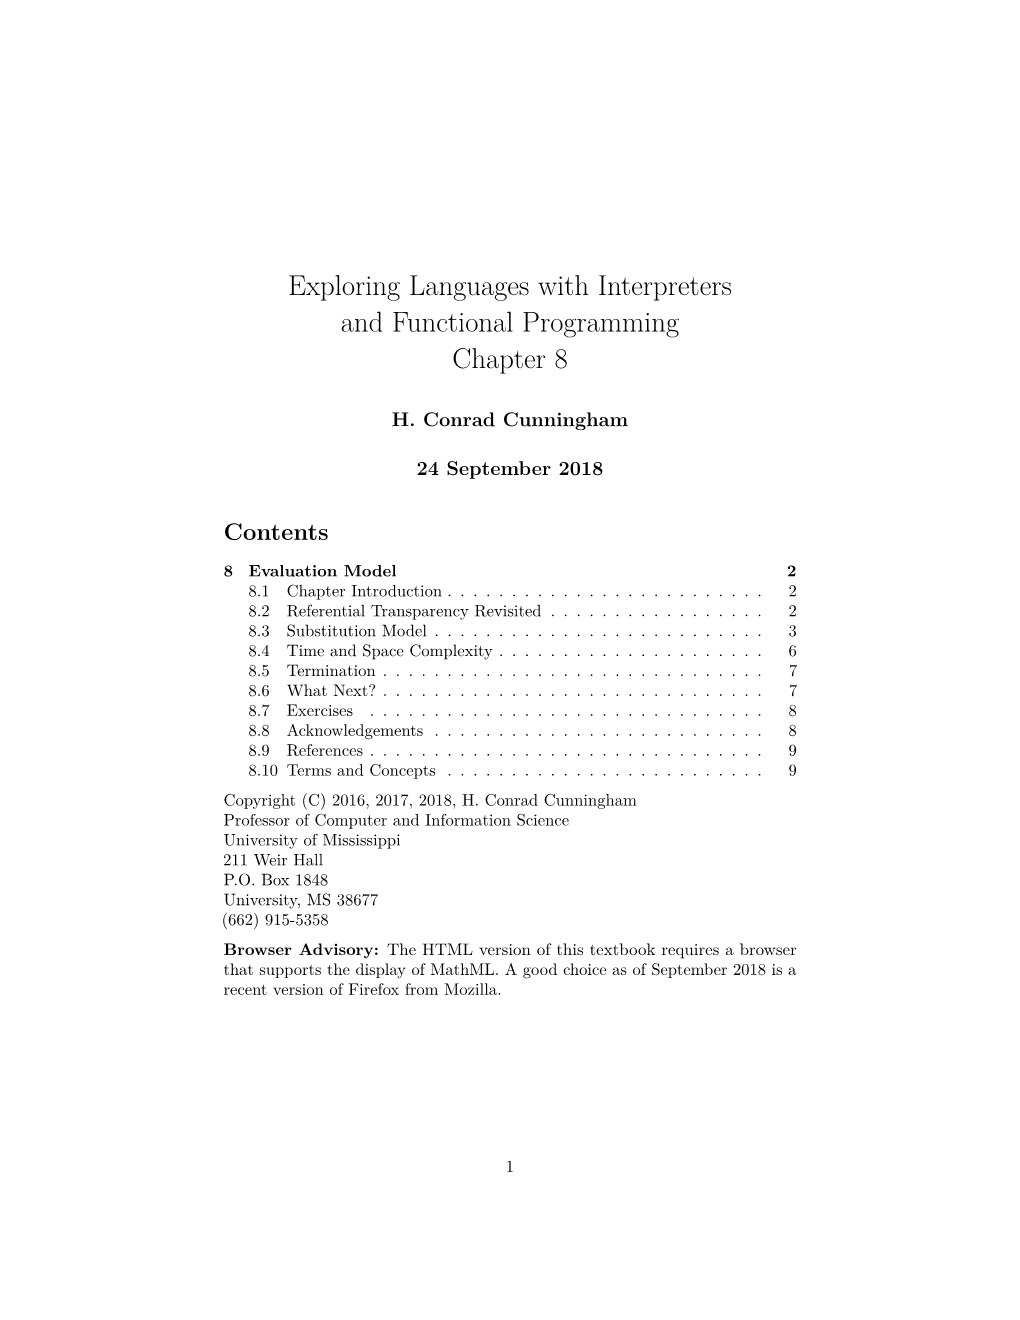 Exploring Languages with Interpreters and Functional Programming Chapter 8